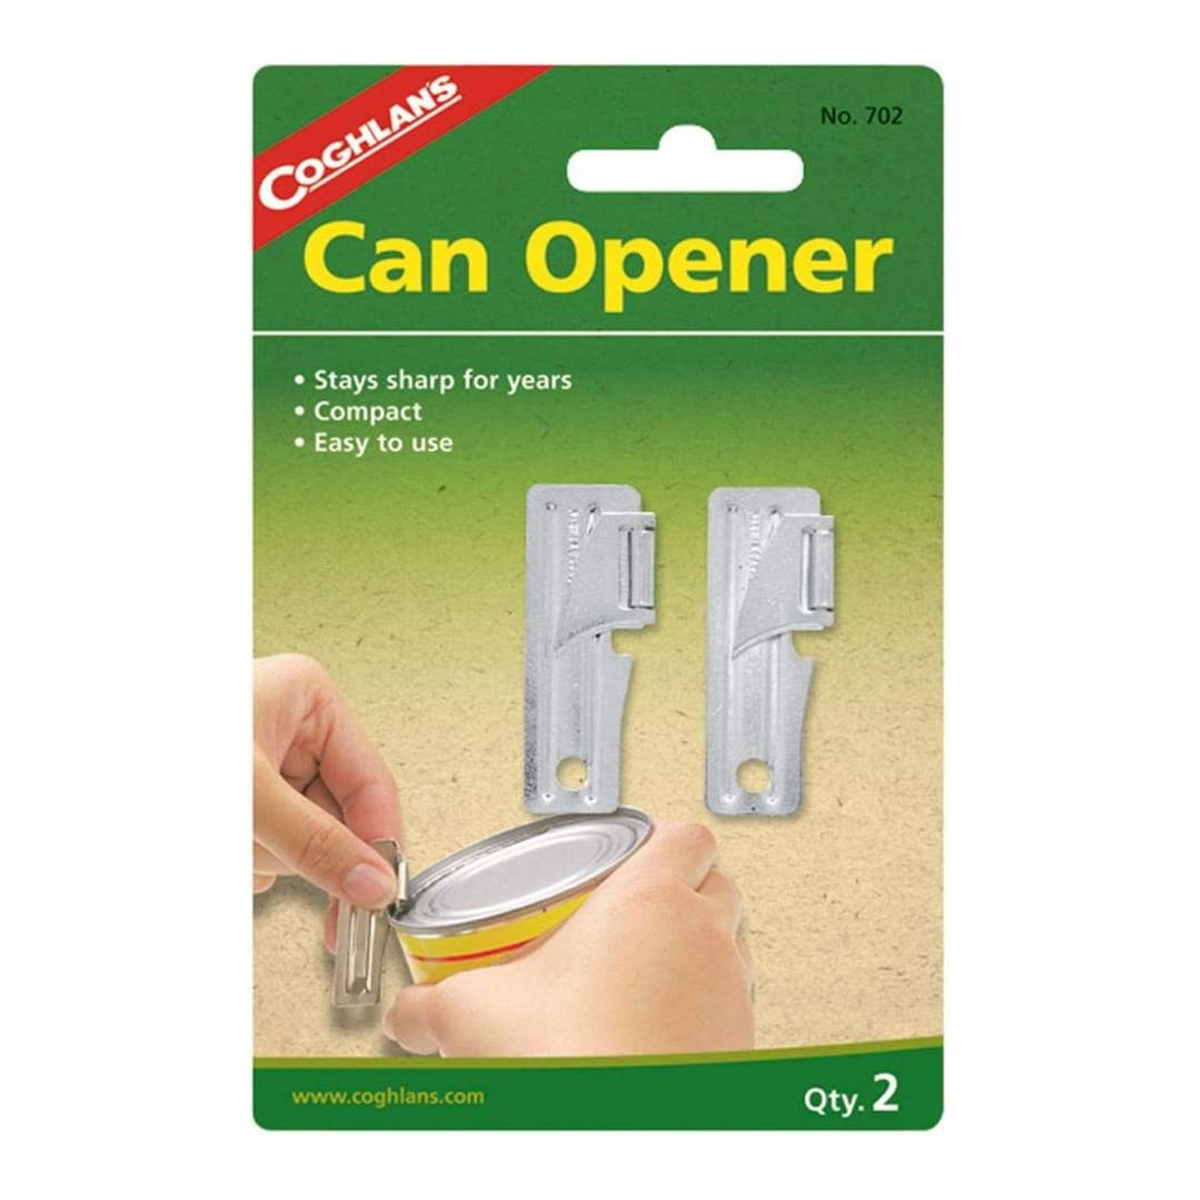 2-Piece G.I. Can Opener Set - Silver